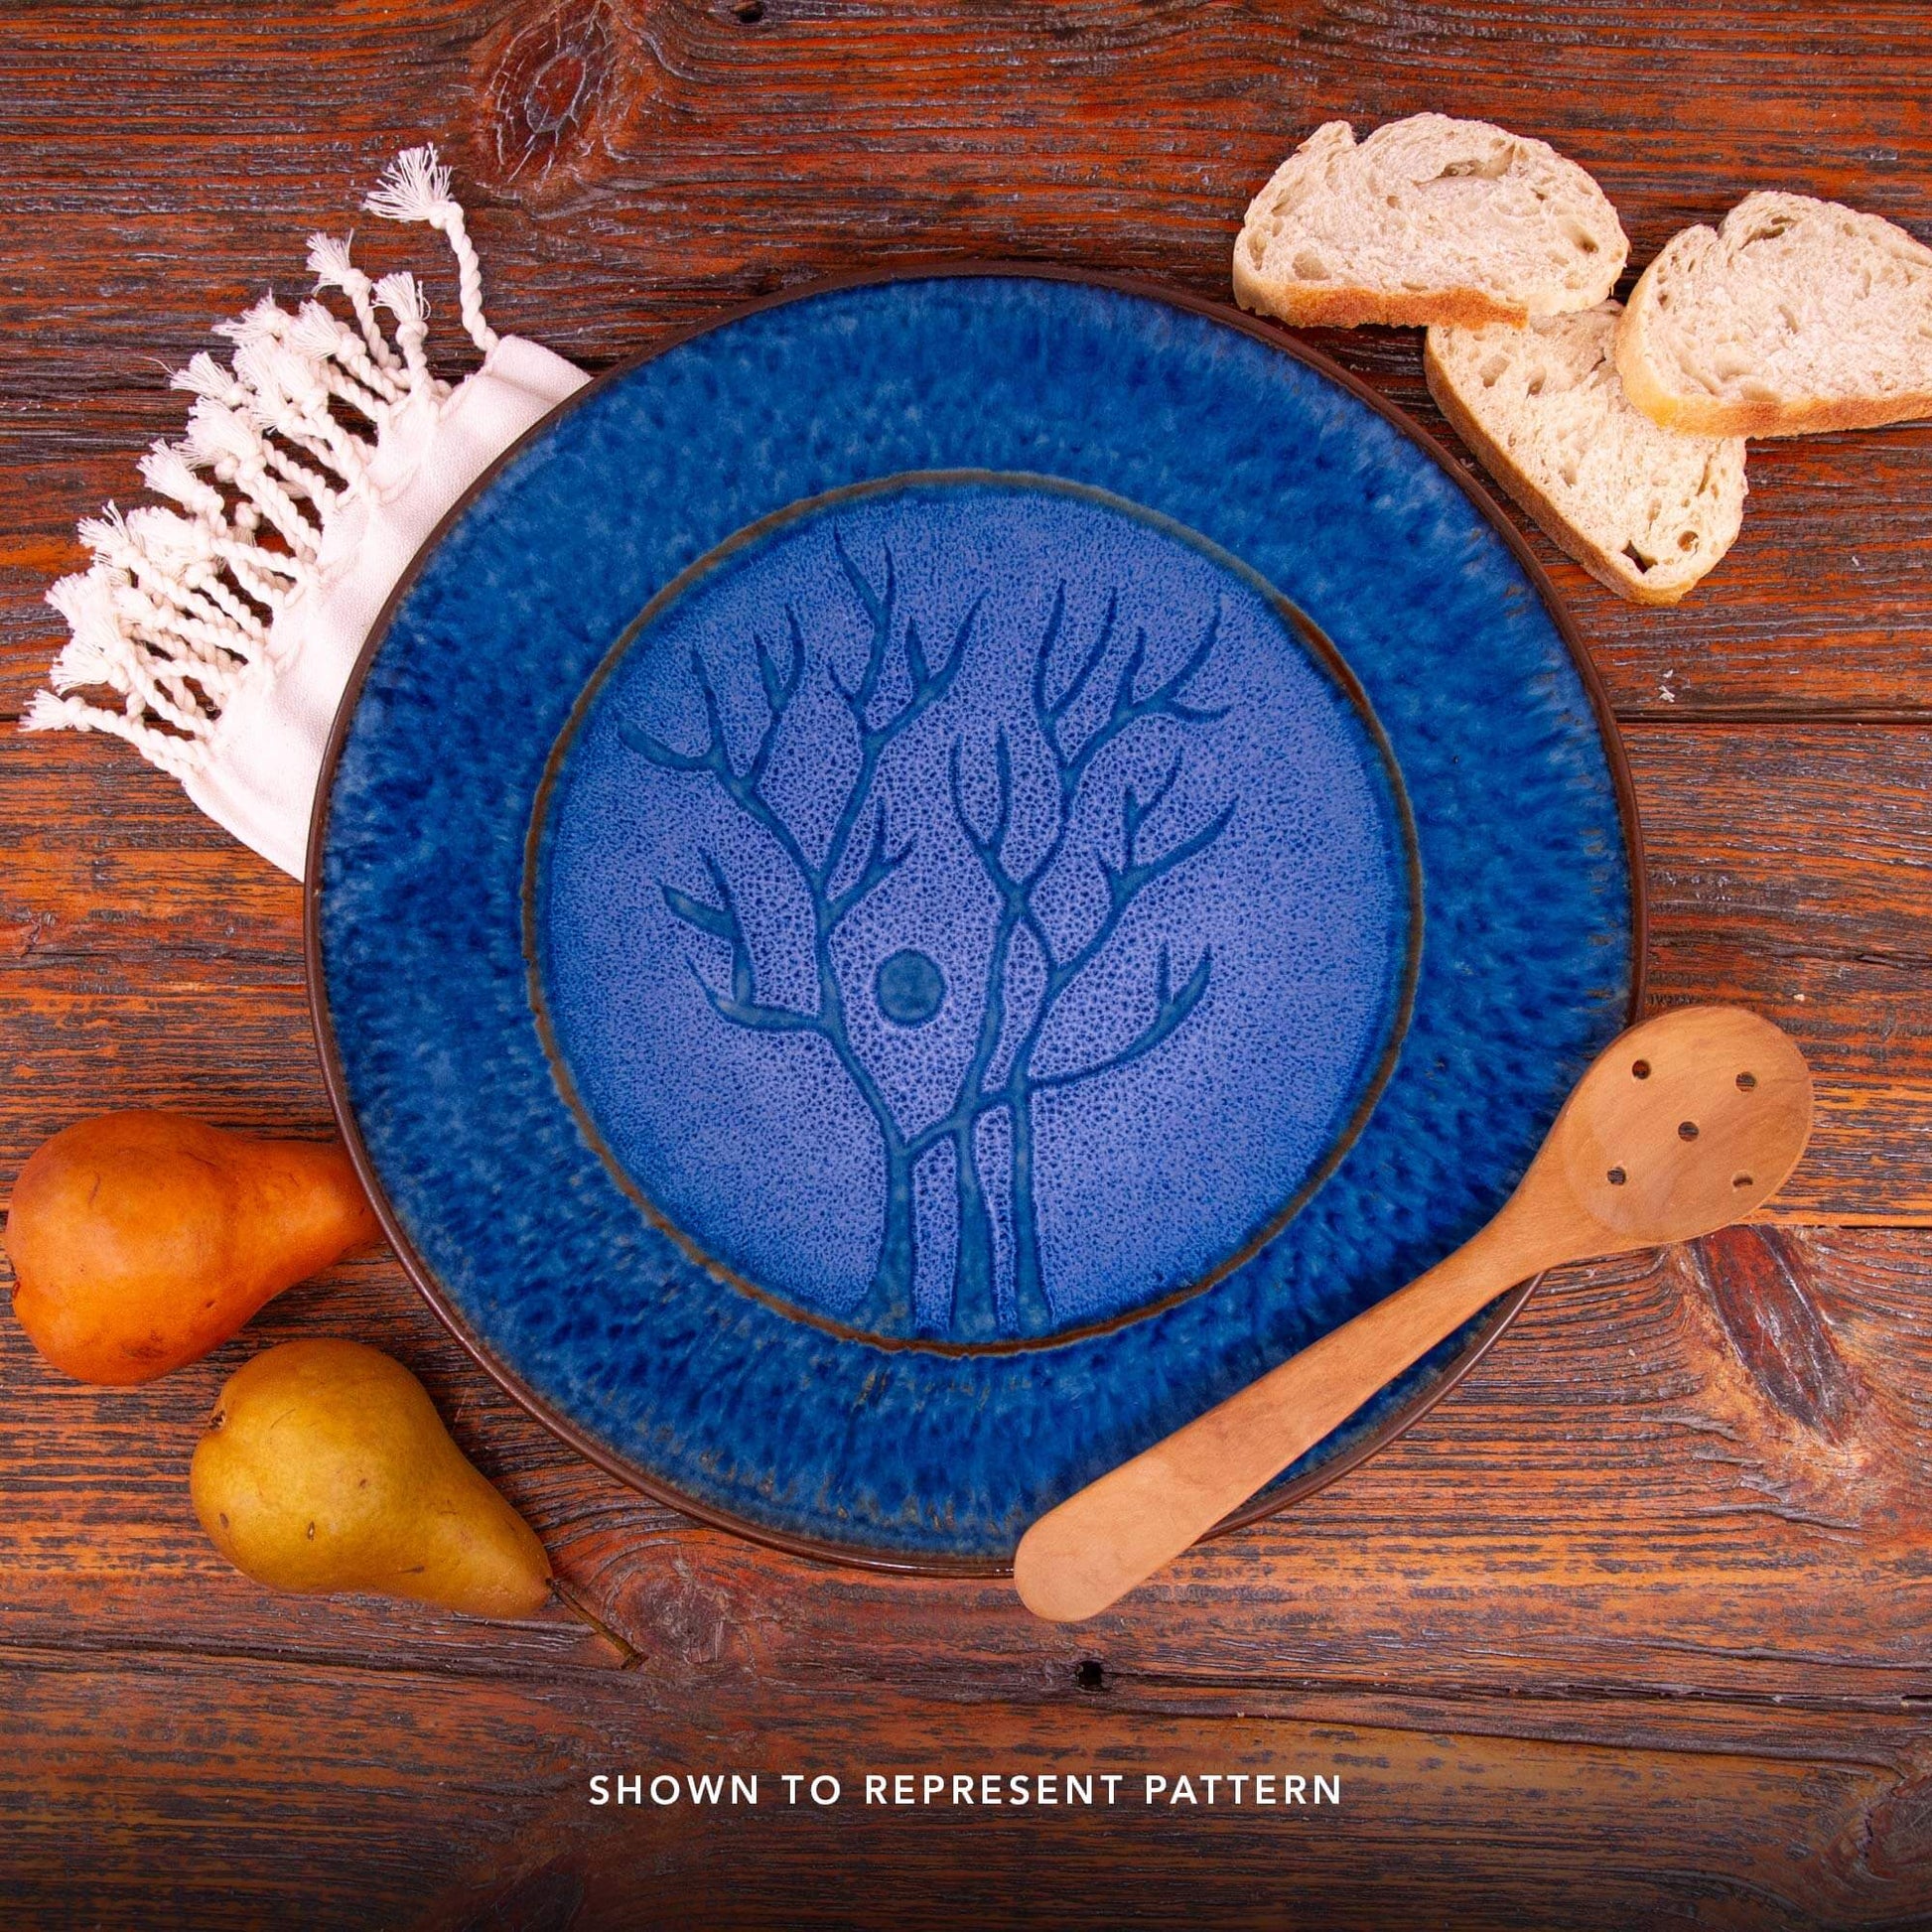 Handmade Pottery Small Chip & Dip in Blue Tree pattern made by Georgetown Pottery in Maine